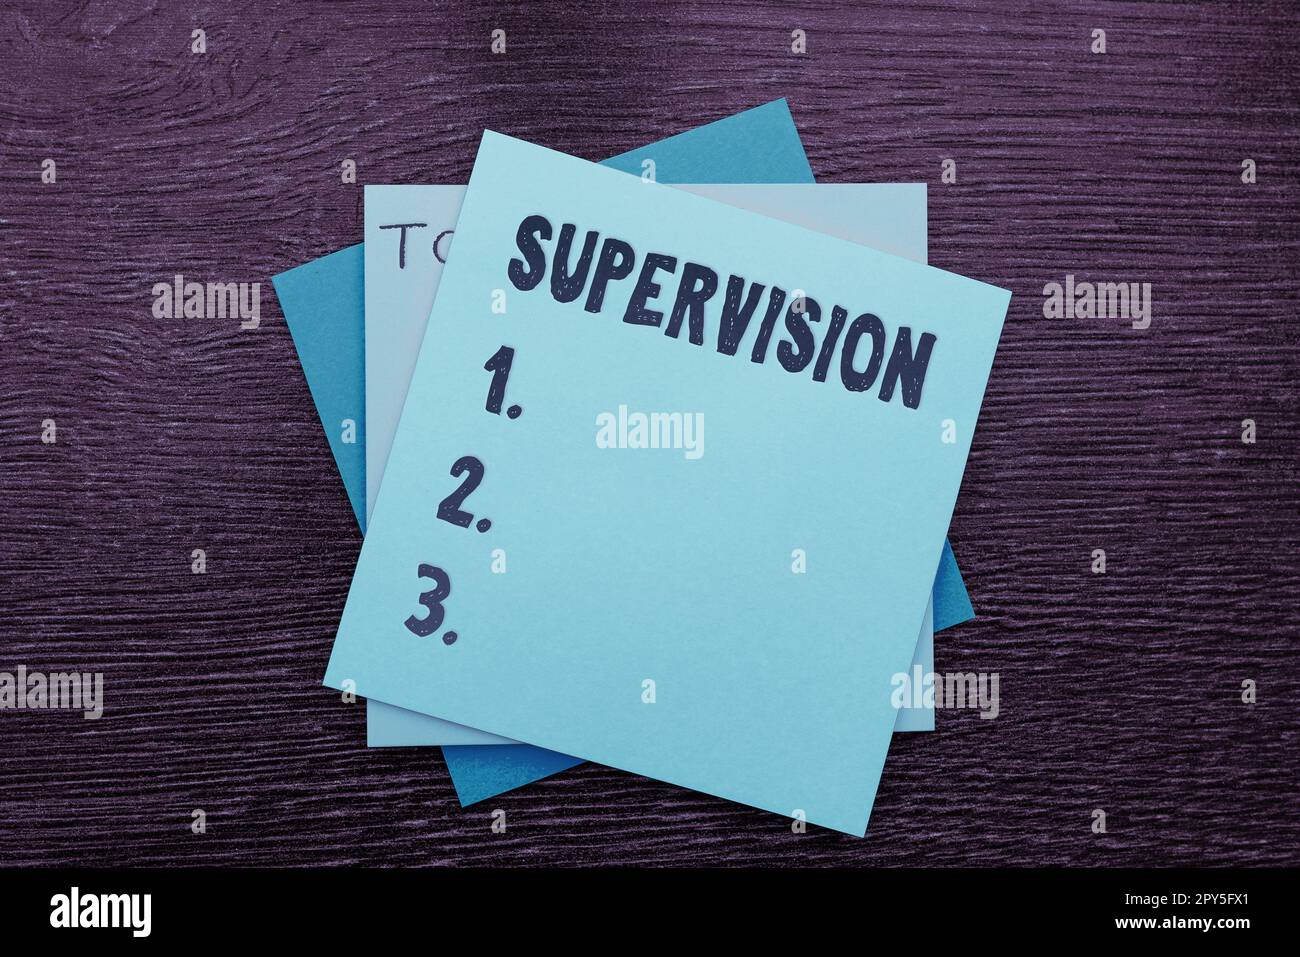 Sign displaying Supervision. Concept meaning monitoring and coordinating the plant operations Stock Photo